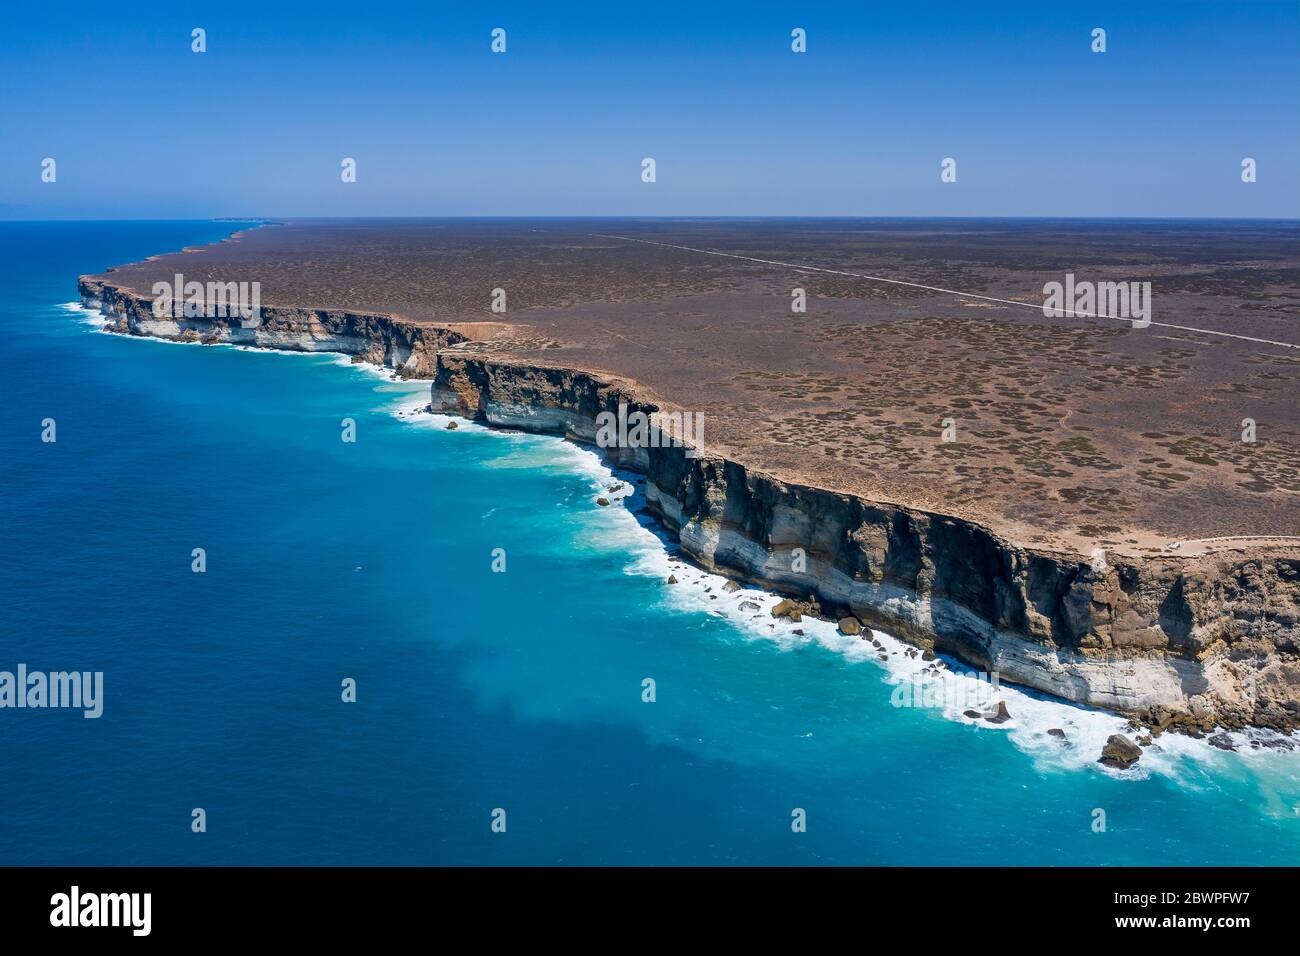 Looking down on the sandstone cliffs and the Great Australian Bight marine park from an unidentified stop on the Eyre Highyway past Bunda Cliffs headi Stock Photo